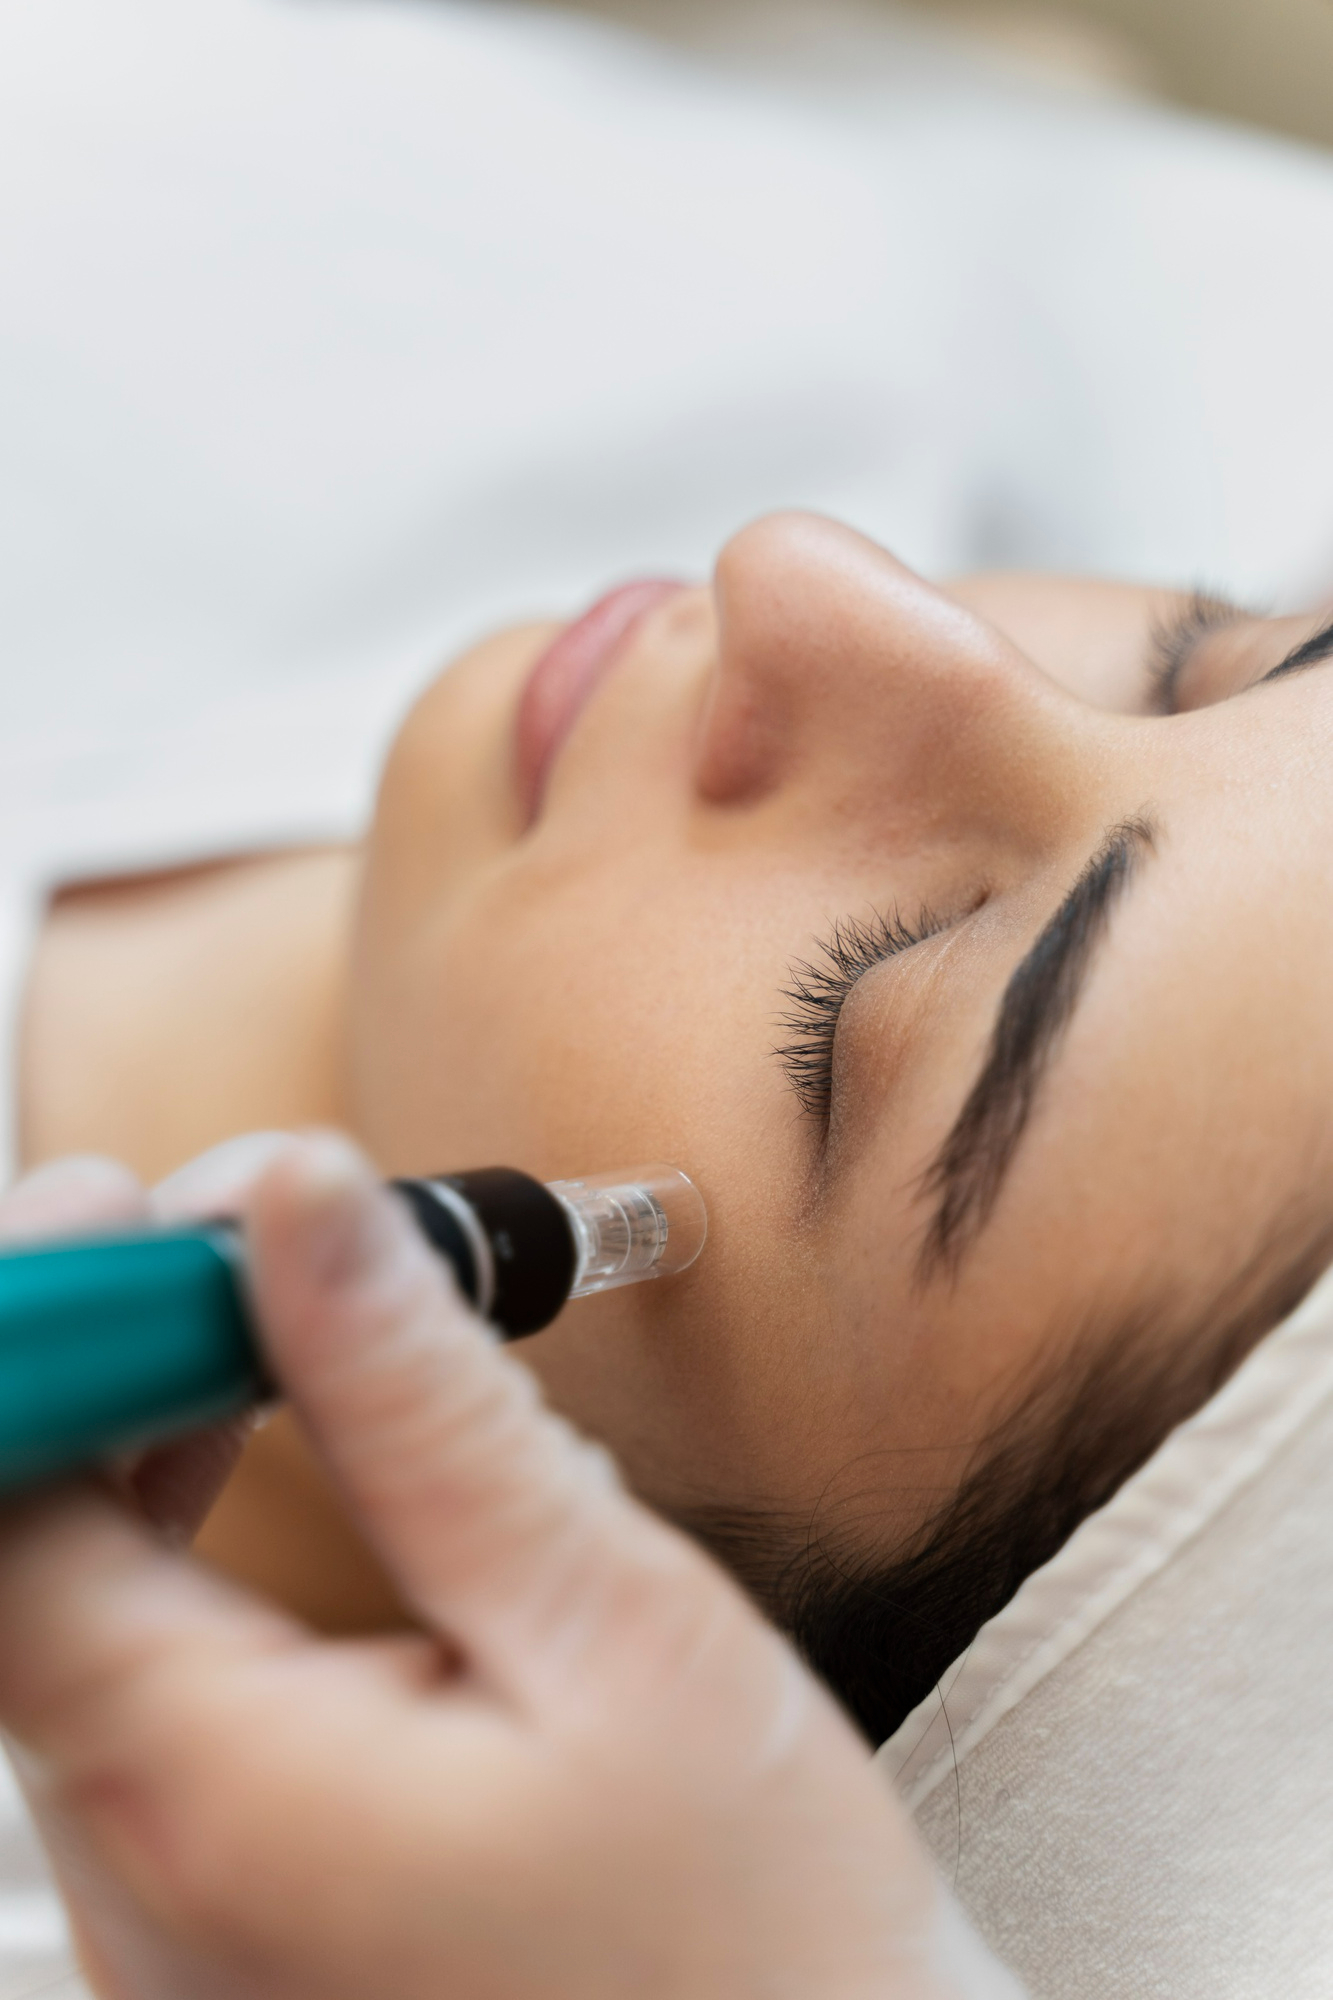 Rejuvenate your face at home with these trending beauty treatments